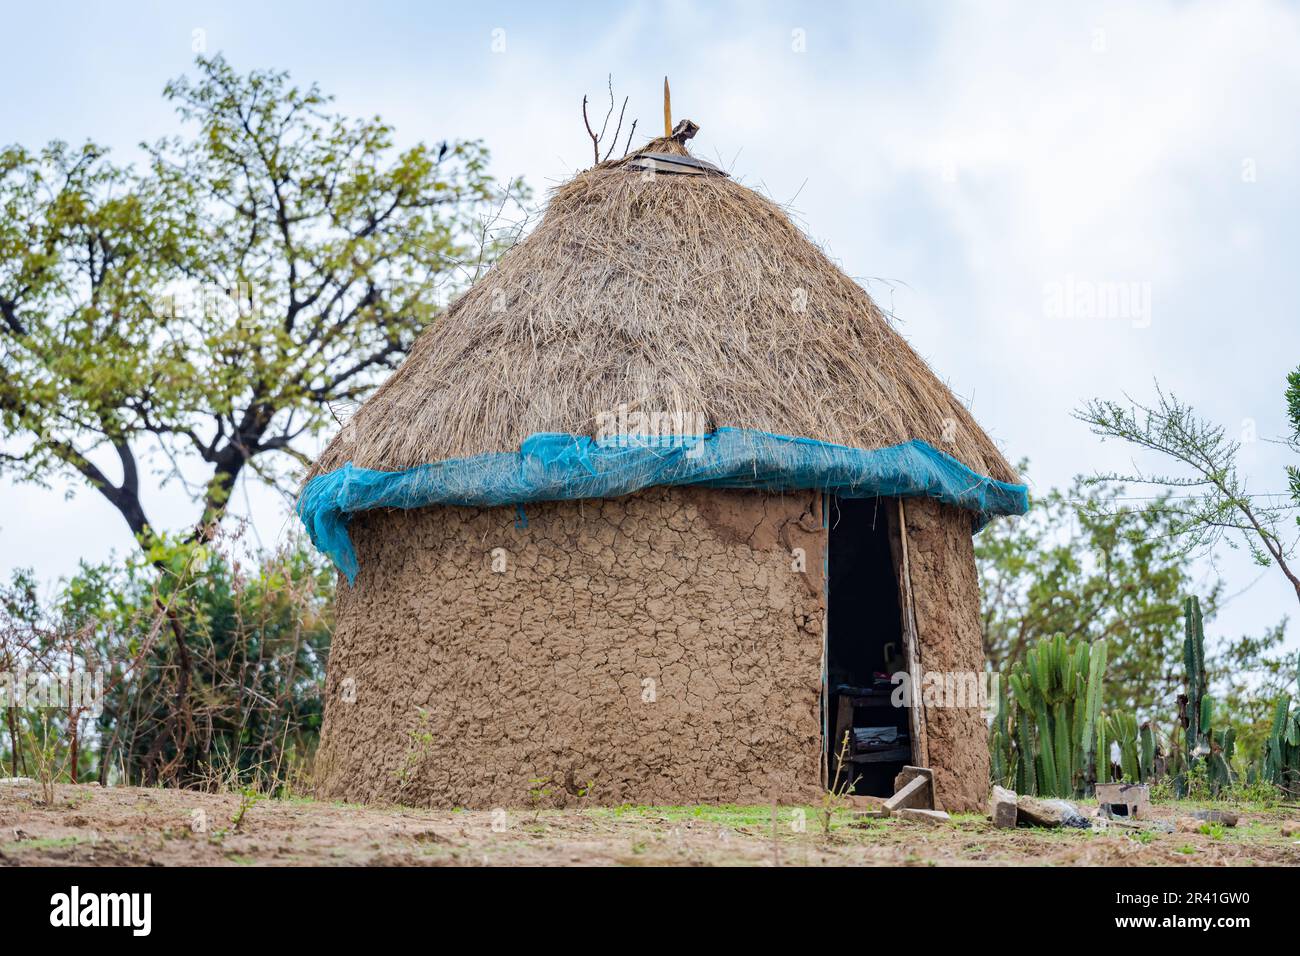 A traditional round mud hut with grass roof and clay wall in a remote village. Kenya, Africa. Stock Photo